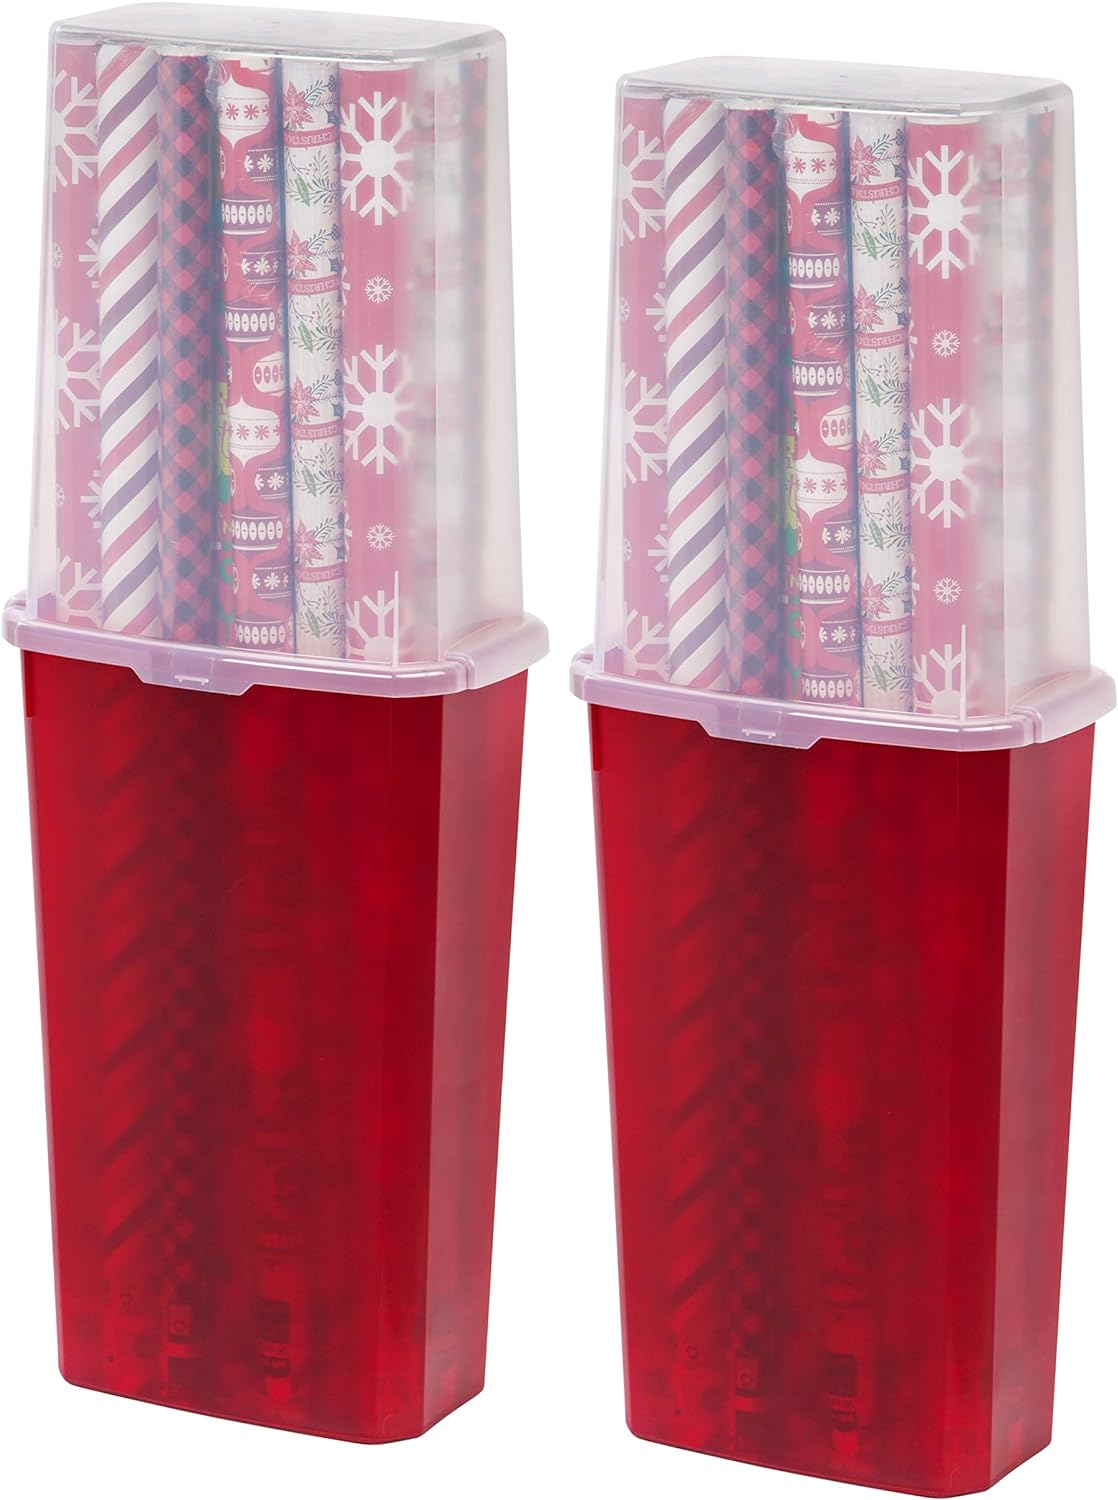 IRIS USA 40 20 Rolls Wrapping Paper Storage Container, Clear/Red